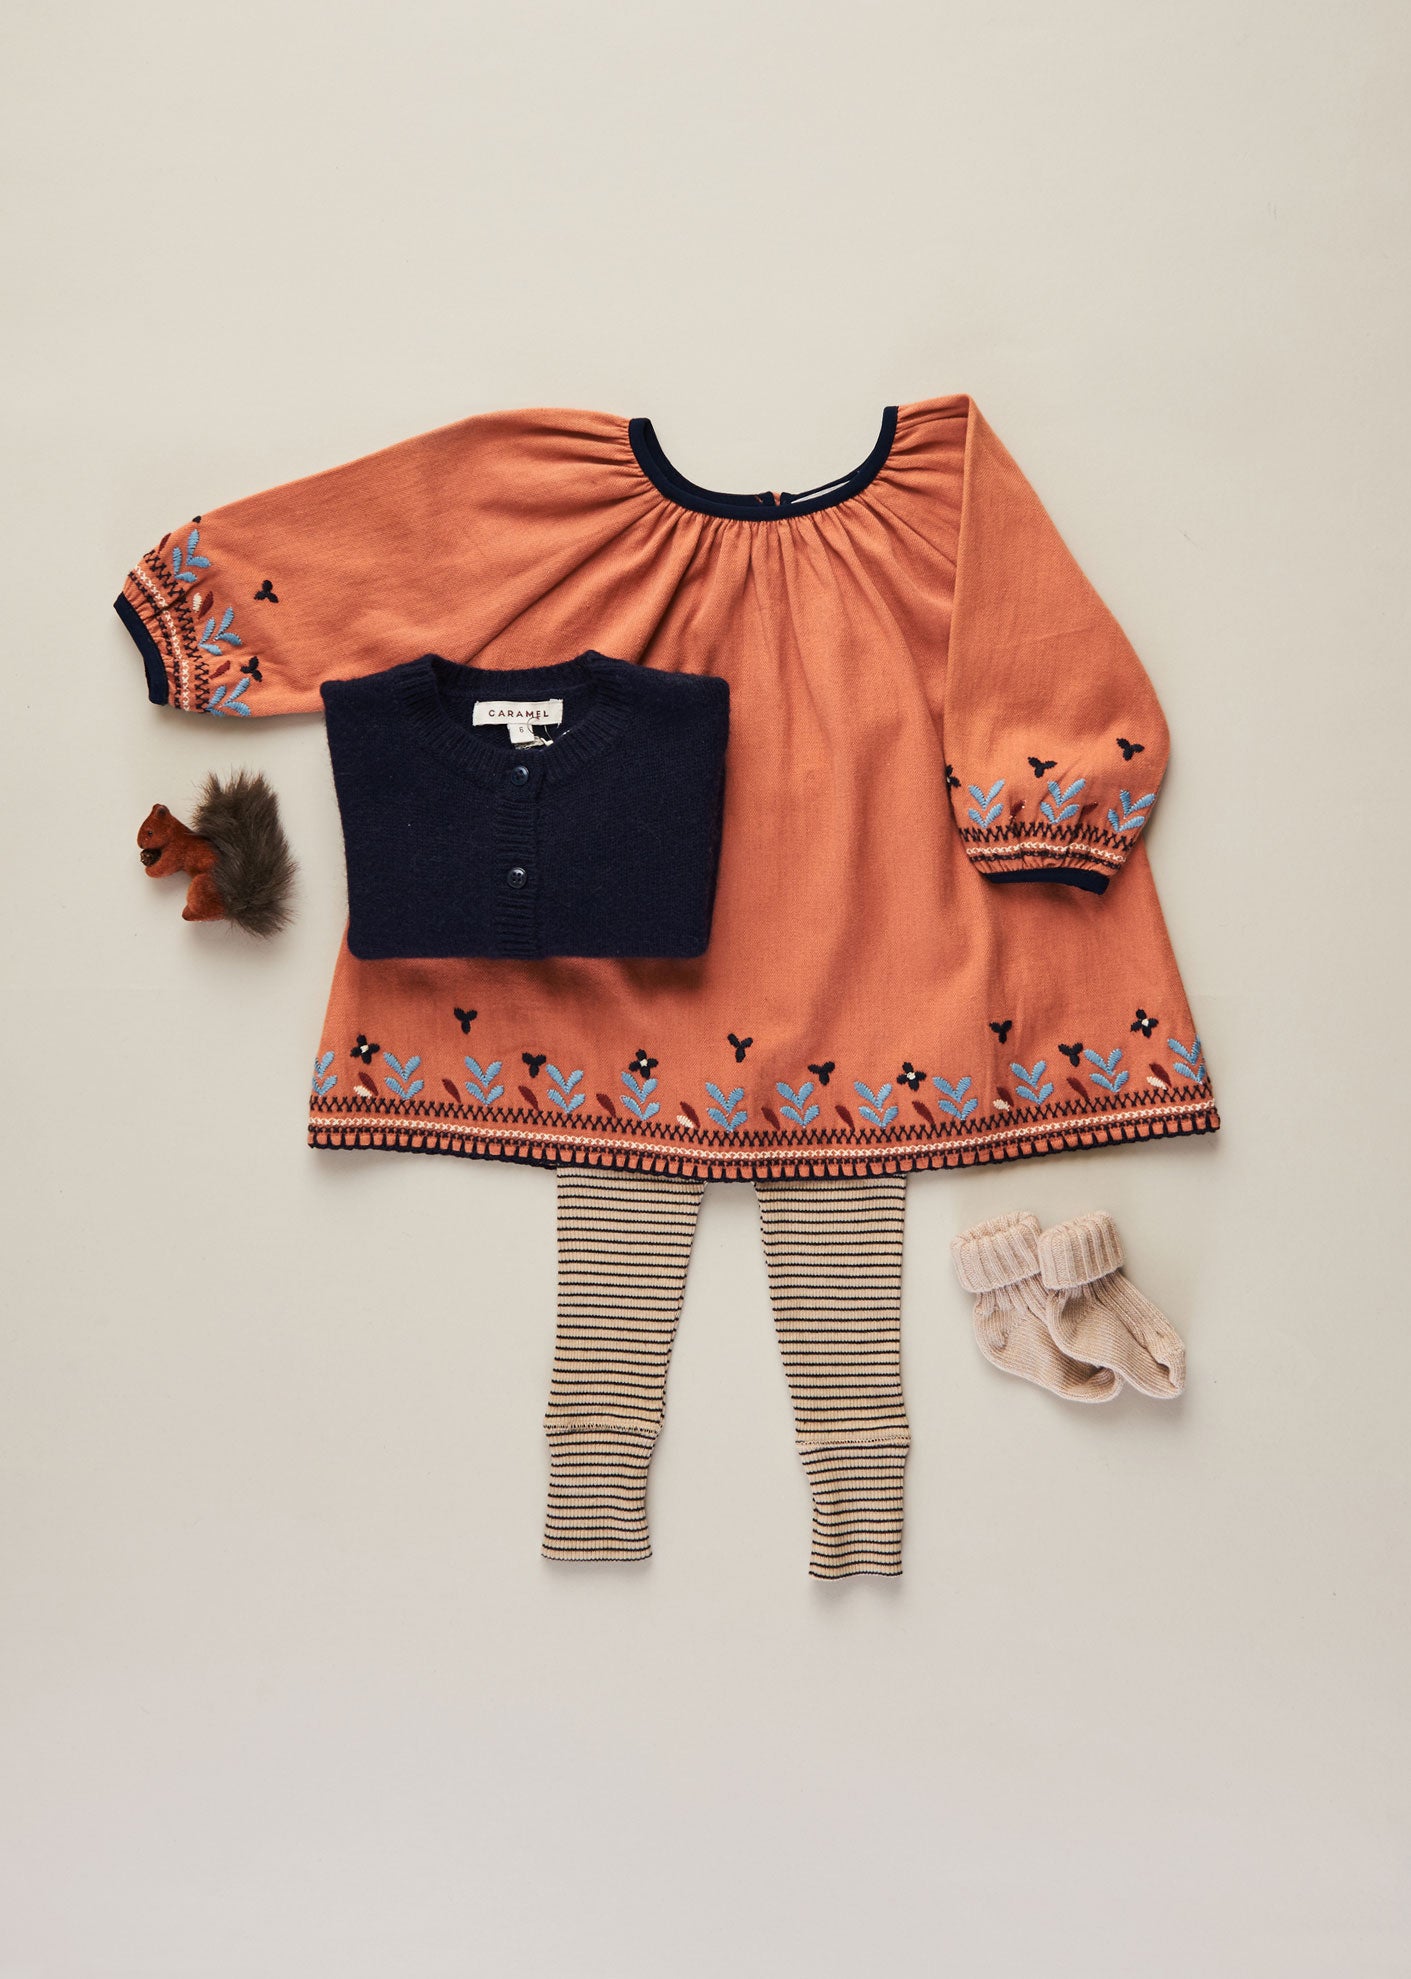 LYDFORD EMBROIDERY BABY DRESS - PERSIMMON